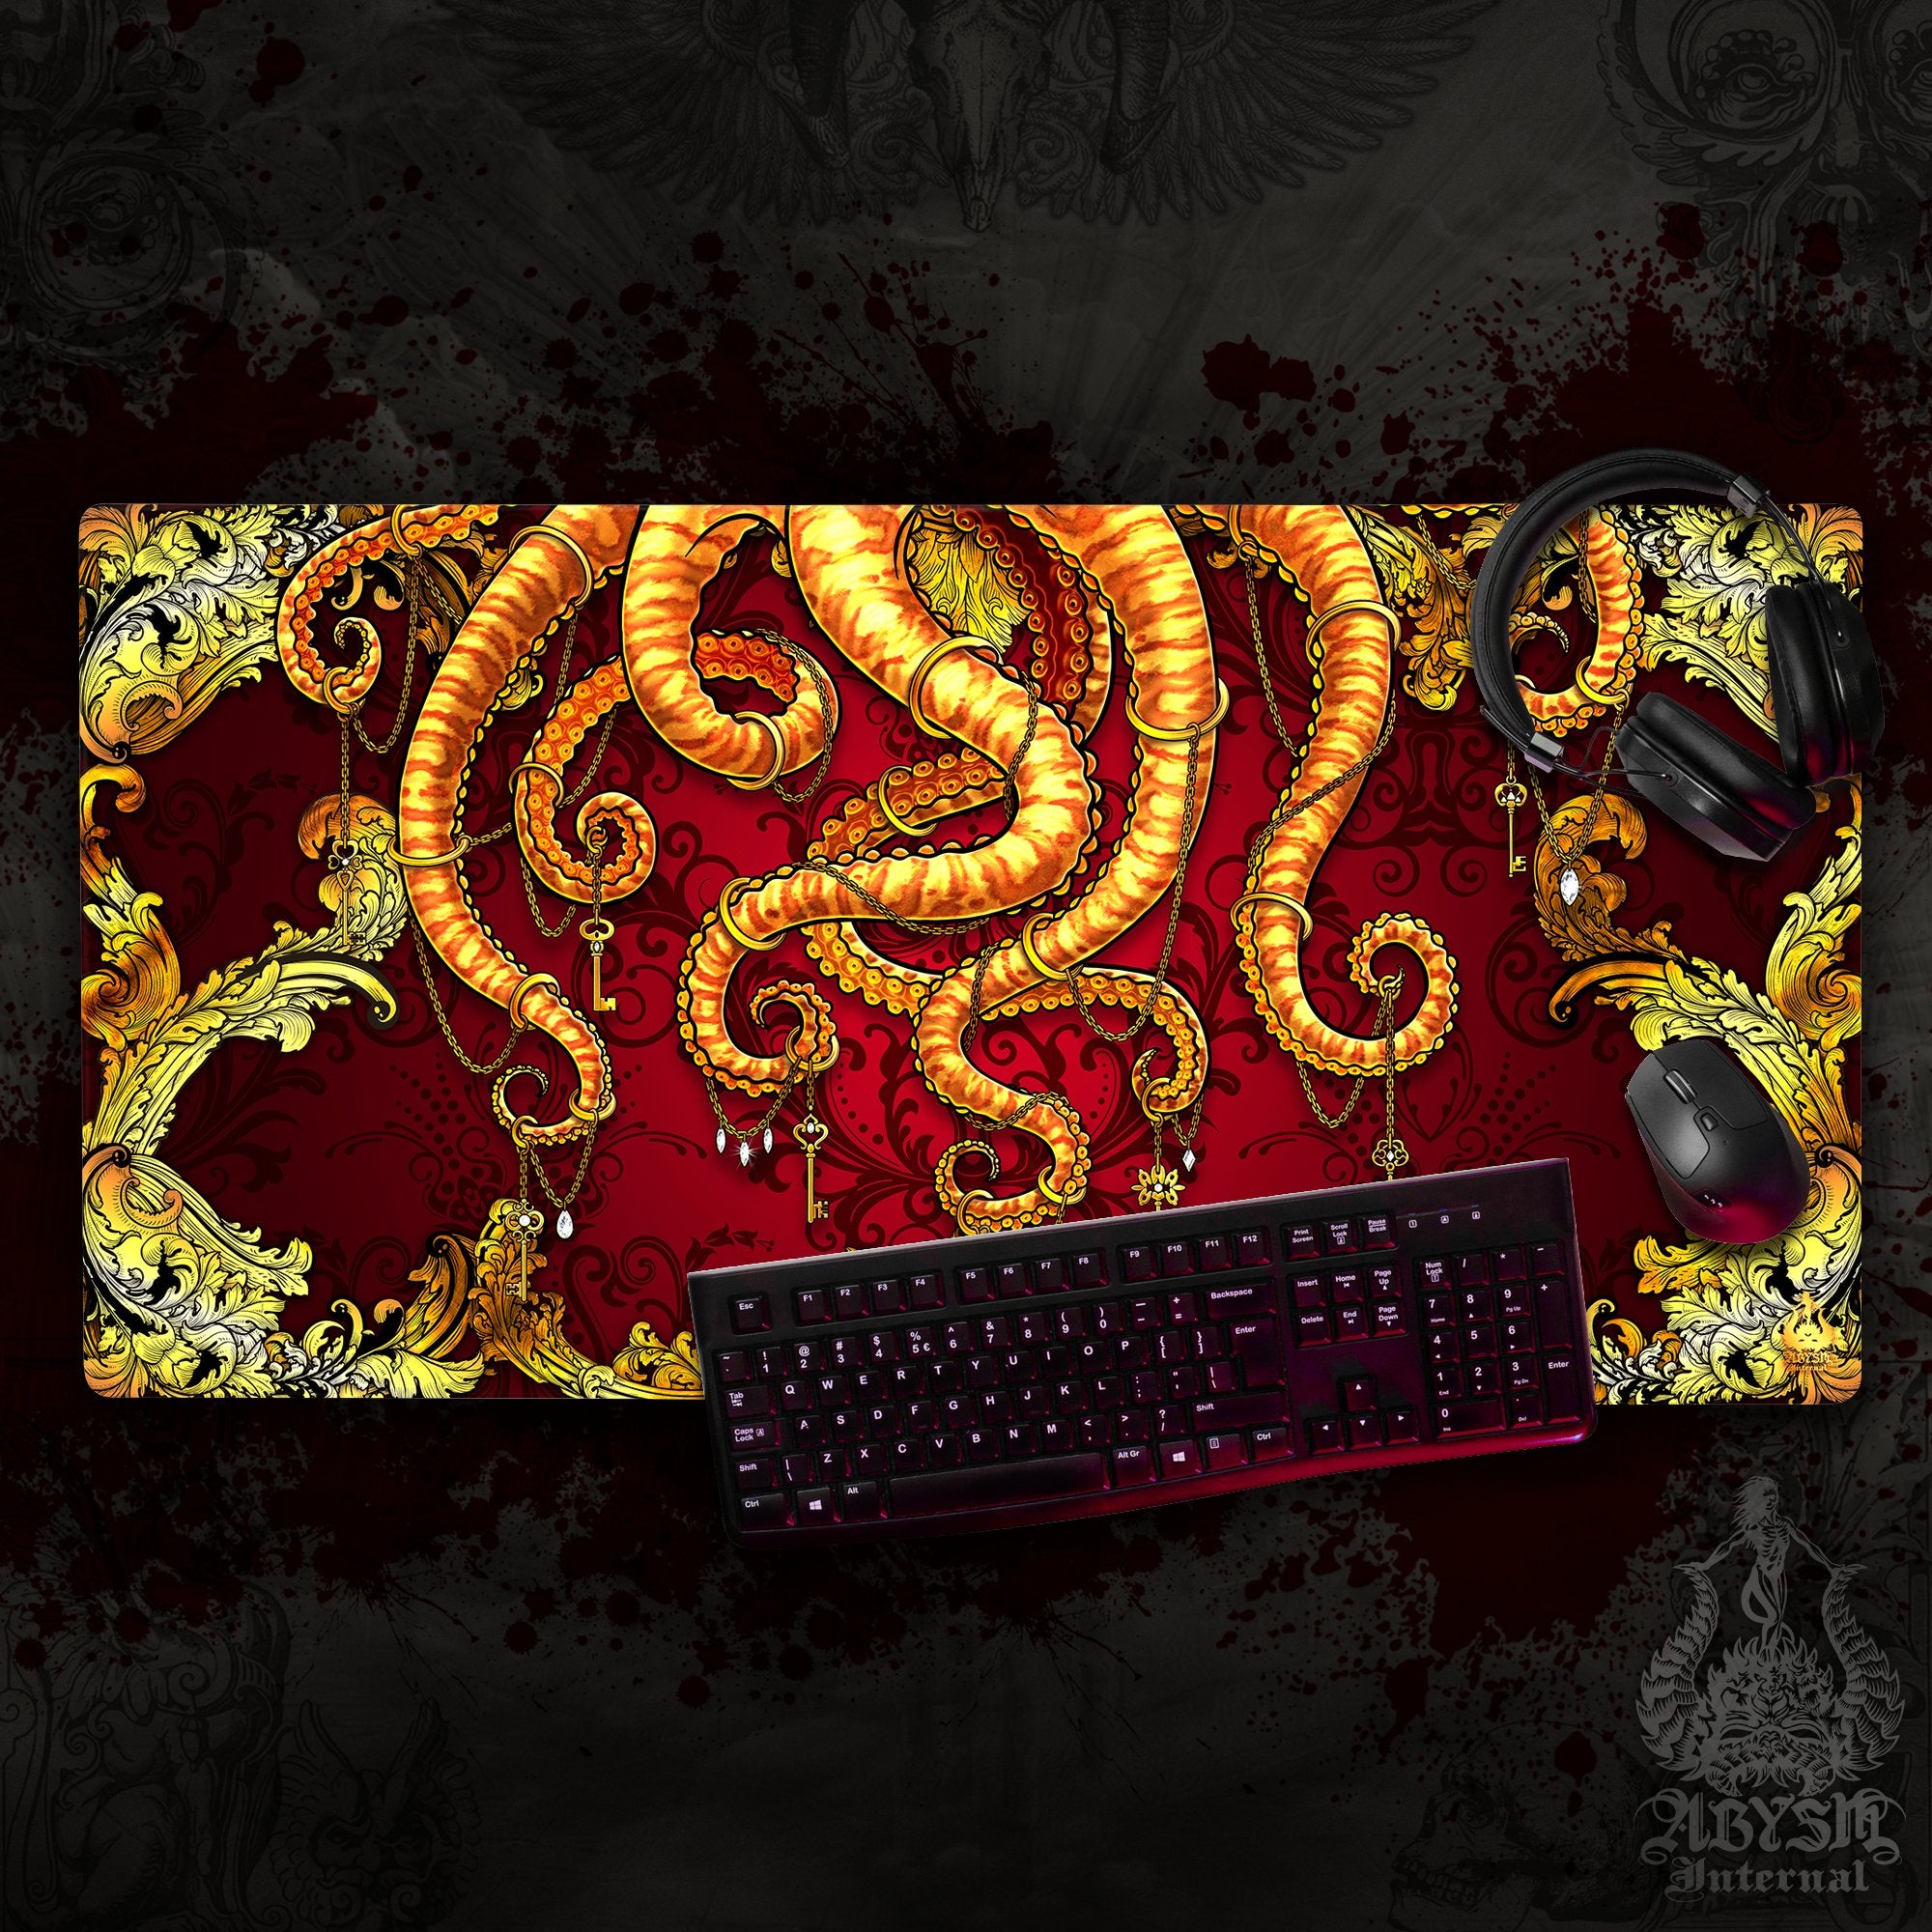 Gold Octopus Mouse Pad, Tentacles Gaming Desk Mat, Baroque Workpad, Gamer Table Protector Cover, Fantasy Art Print - 2 Colors - Abysm Internal